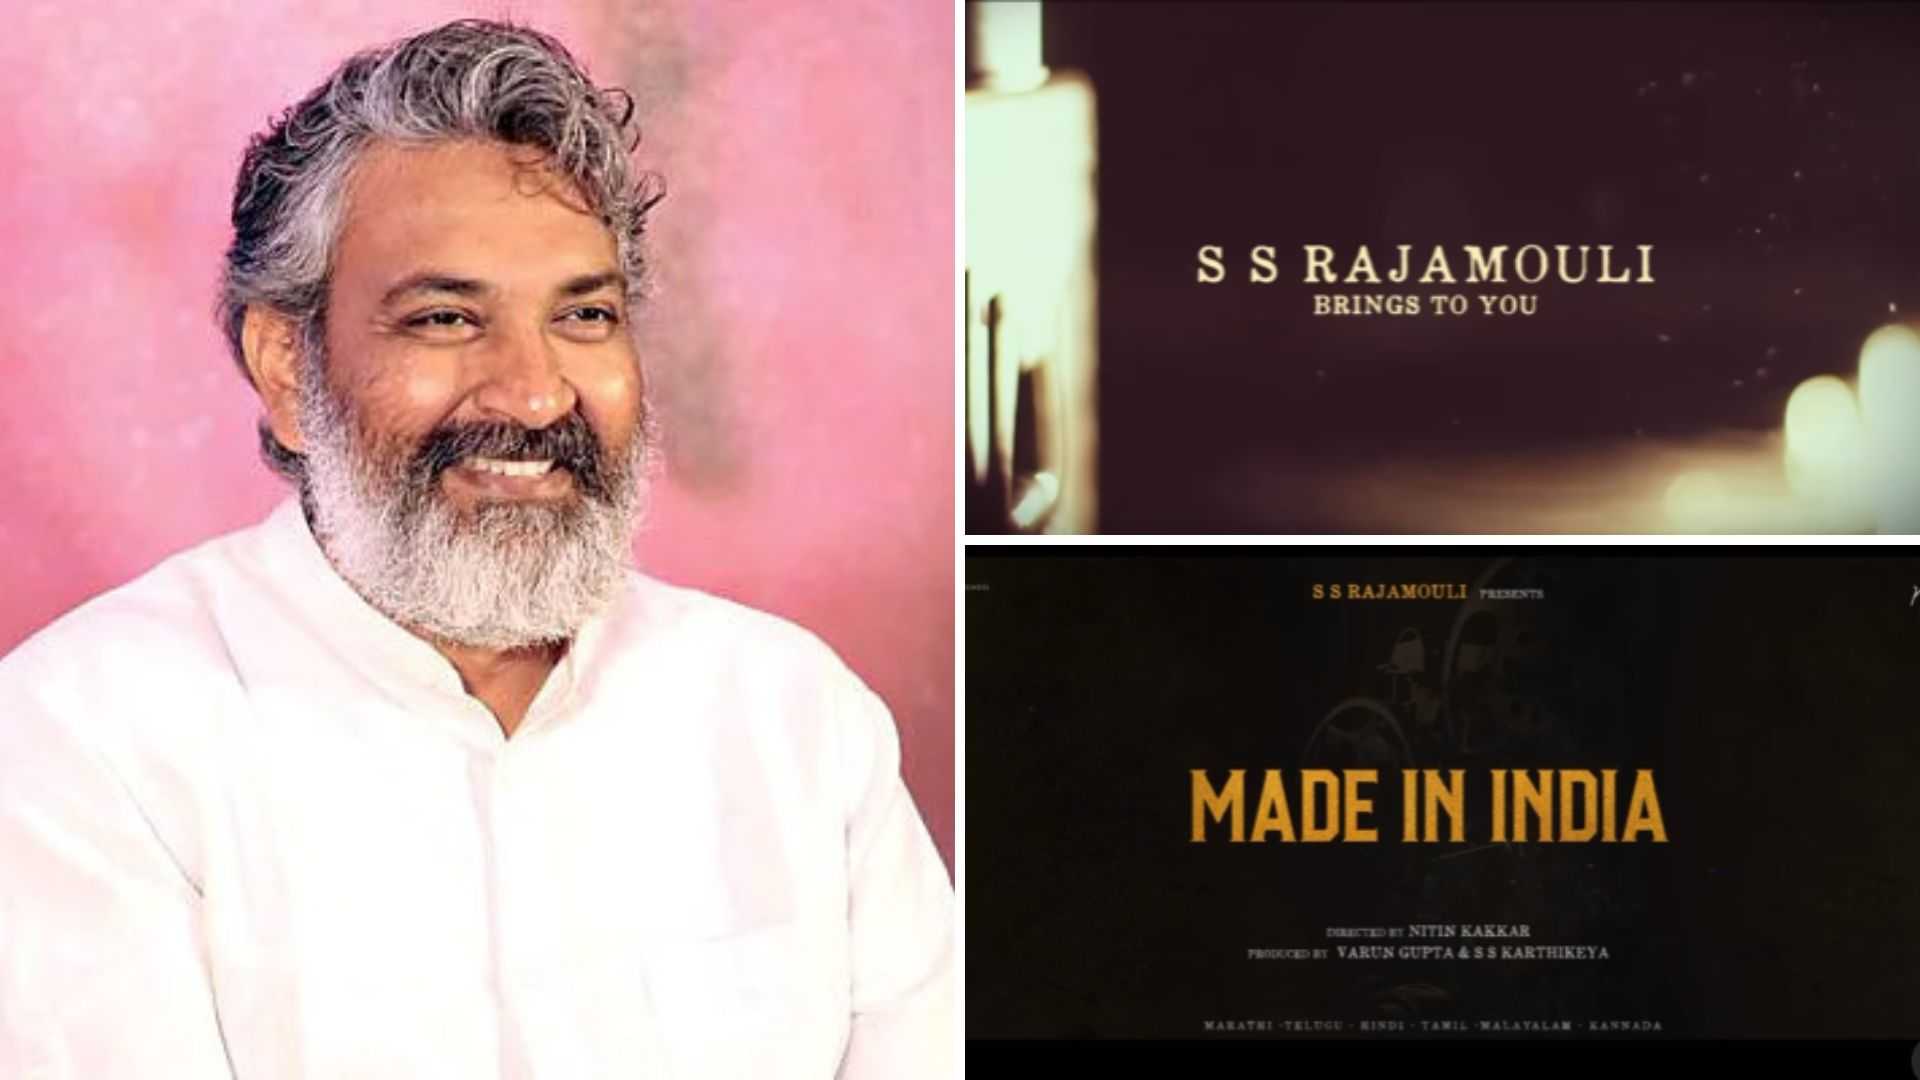 Made In India: SS Rajamouli to present biopic on Indian cinema, says its narration moved him emotionally